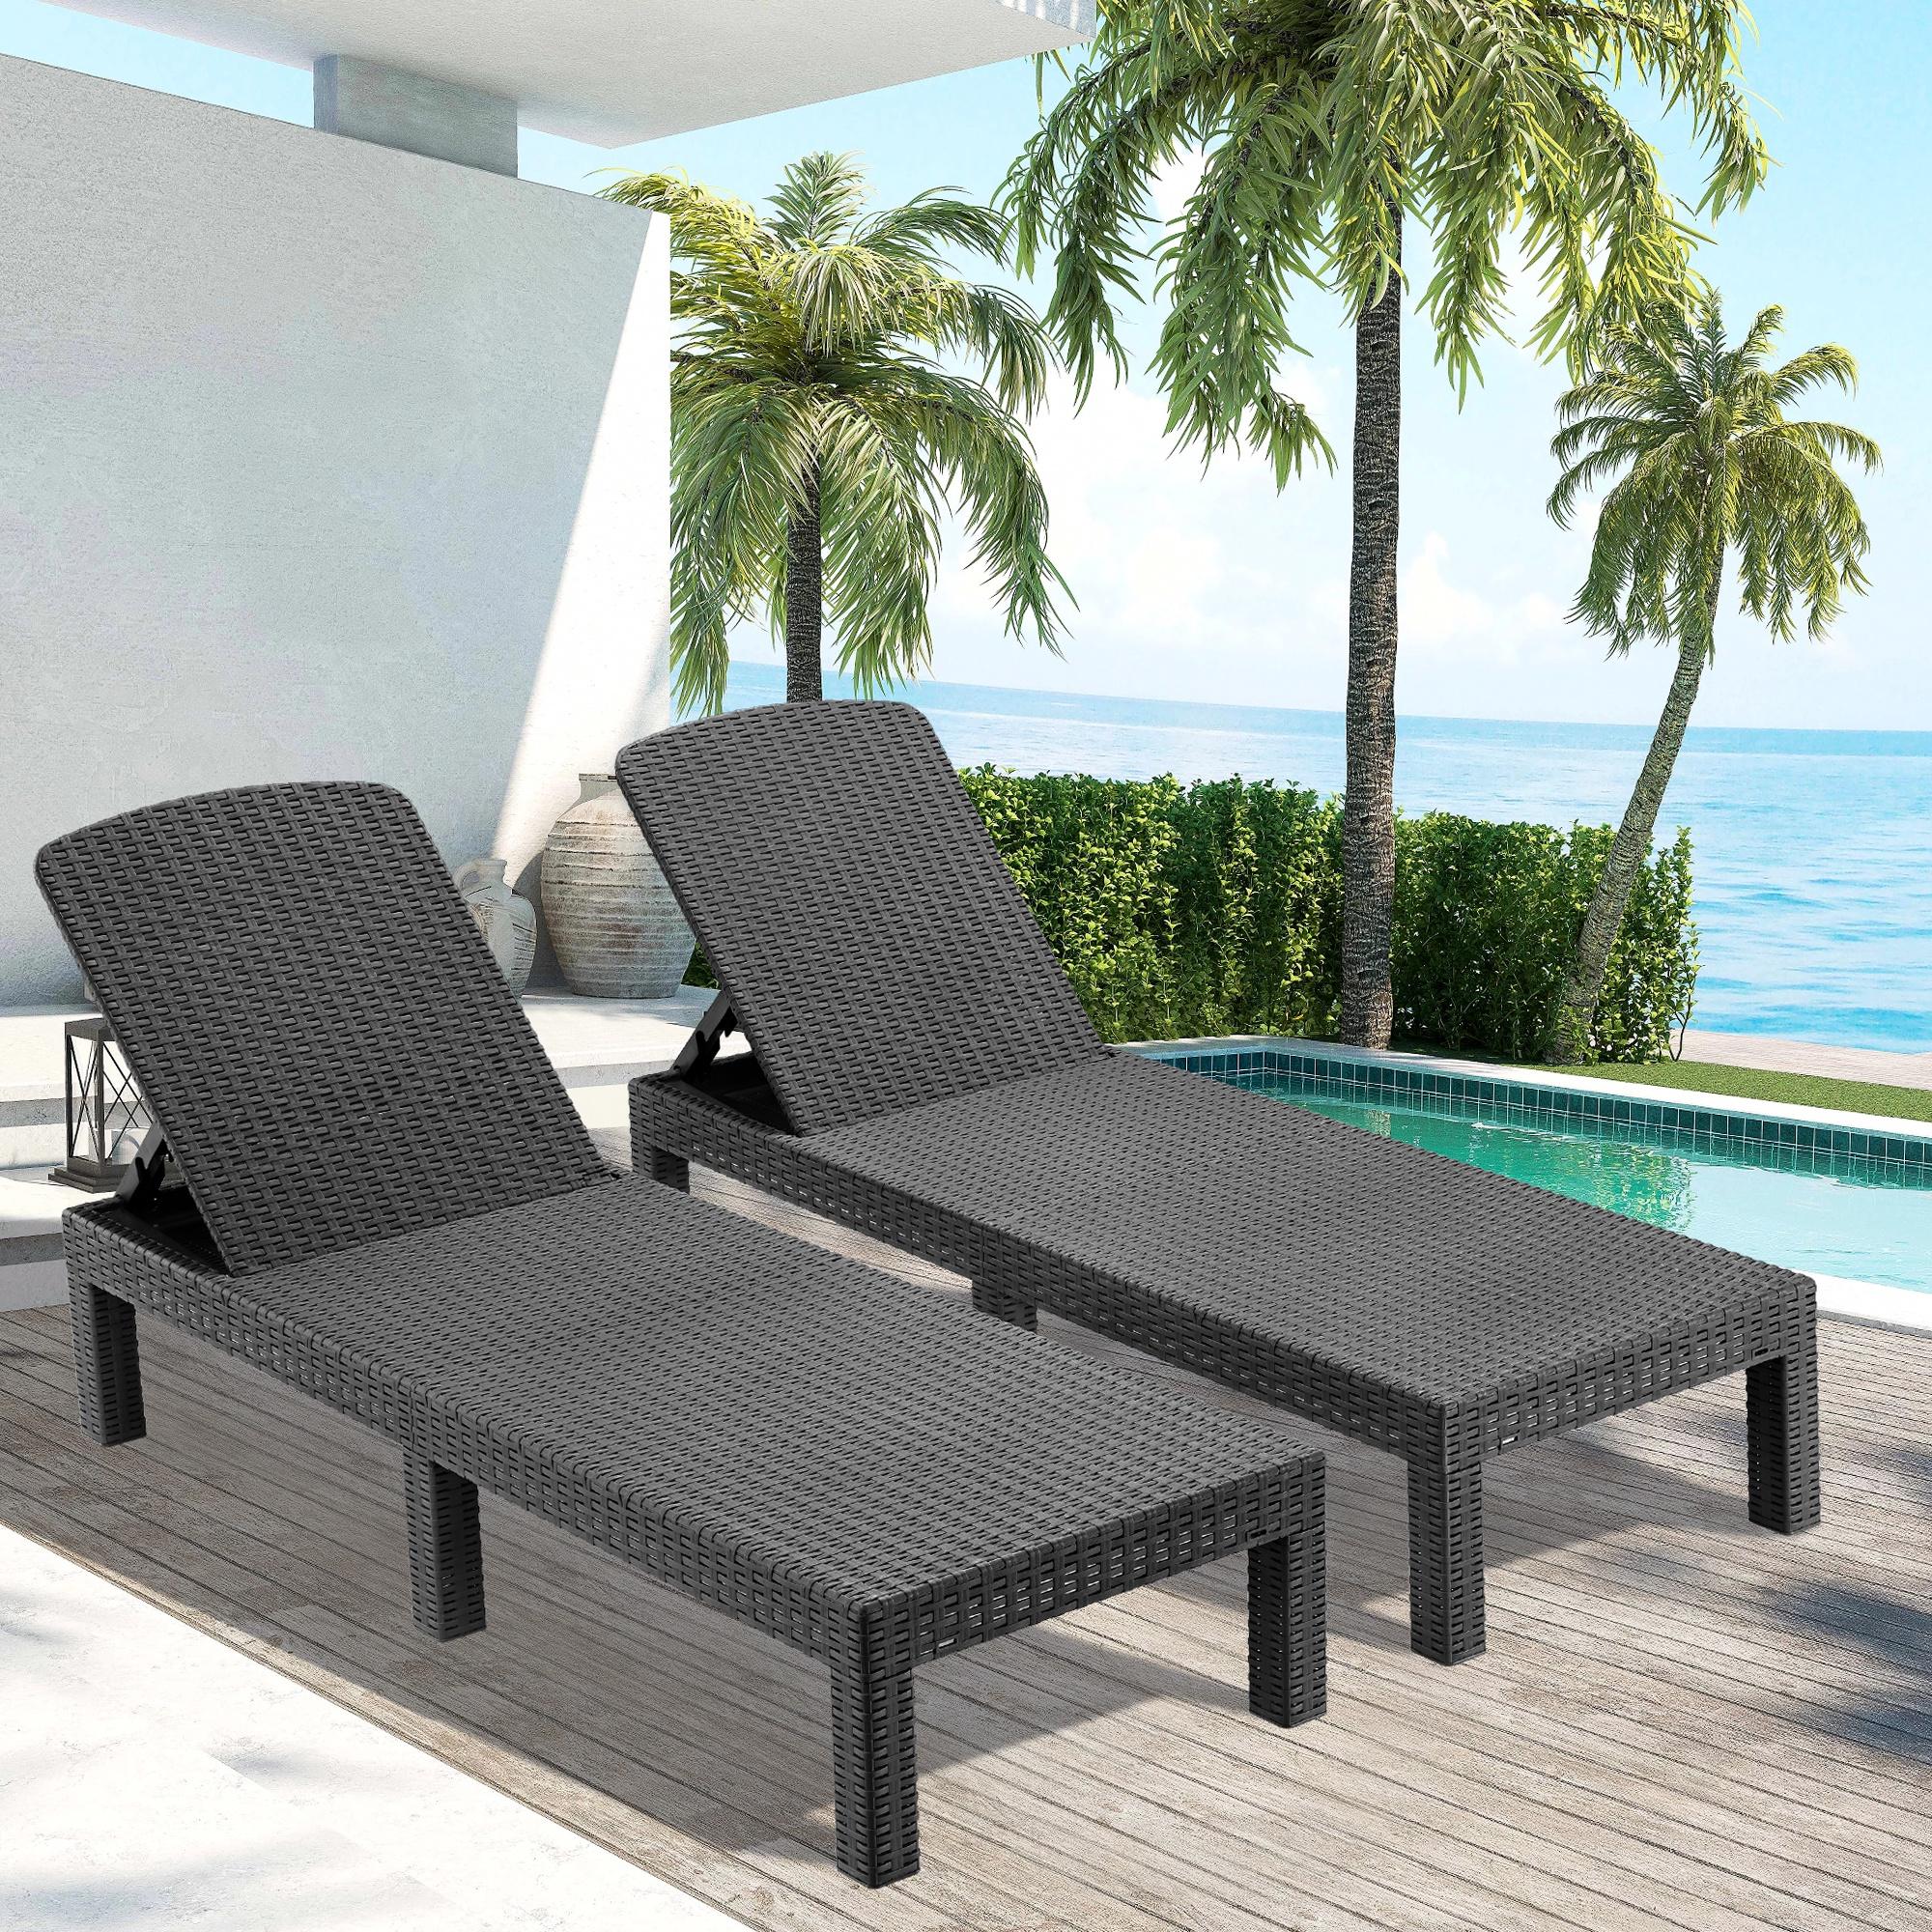 Chaise Lounge Set of 2, Patio Reclining Lounge Chairs with Adjustable Backrest, Outdoor All-Weather PP Resin Sun Loungers for Backyard, Poolside, Porch, Garden, Gray - image 1 of 10